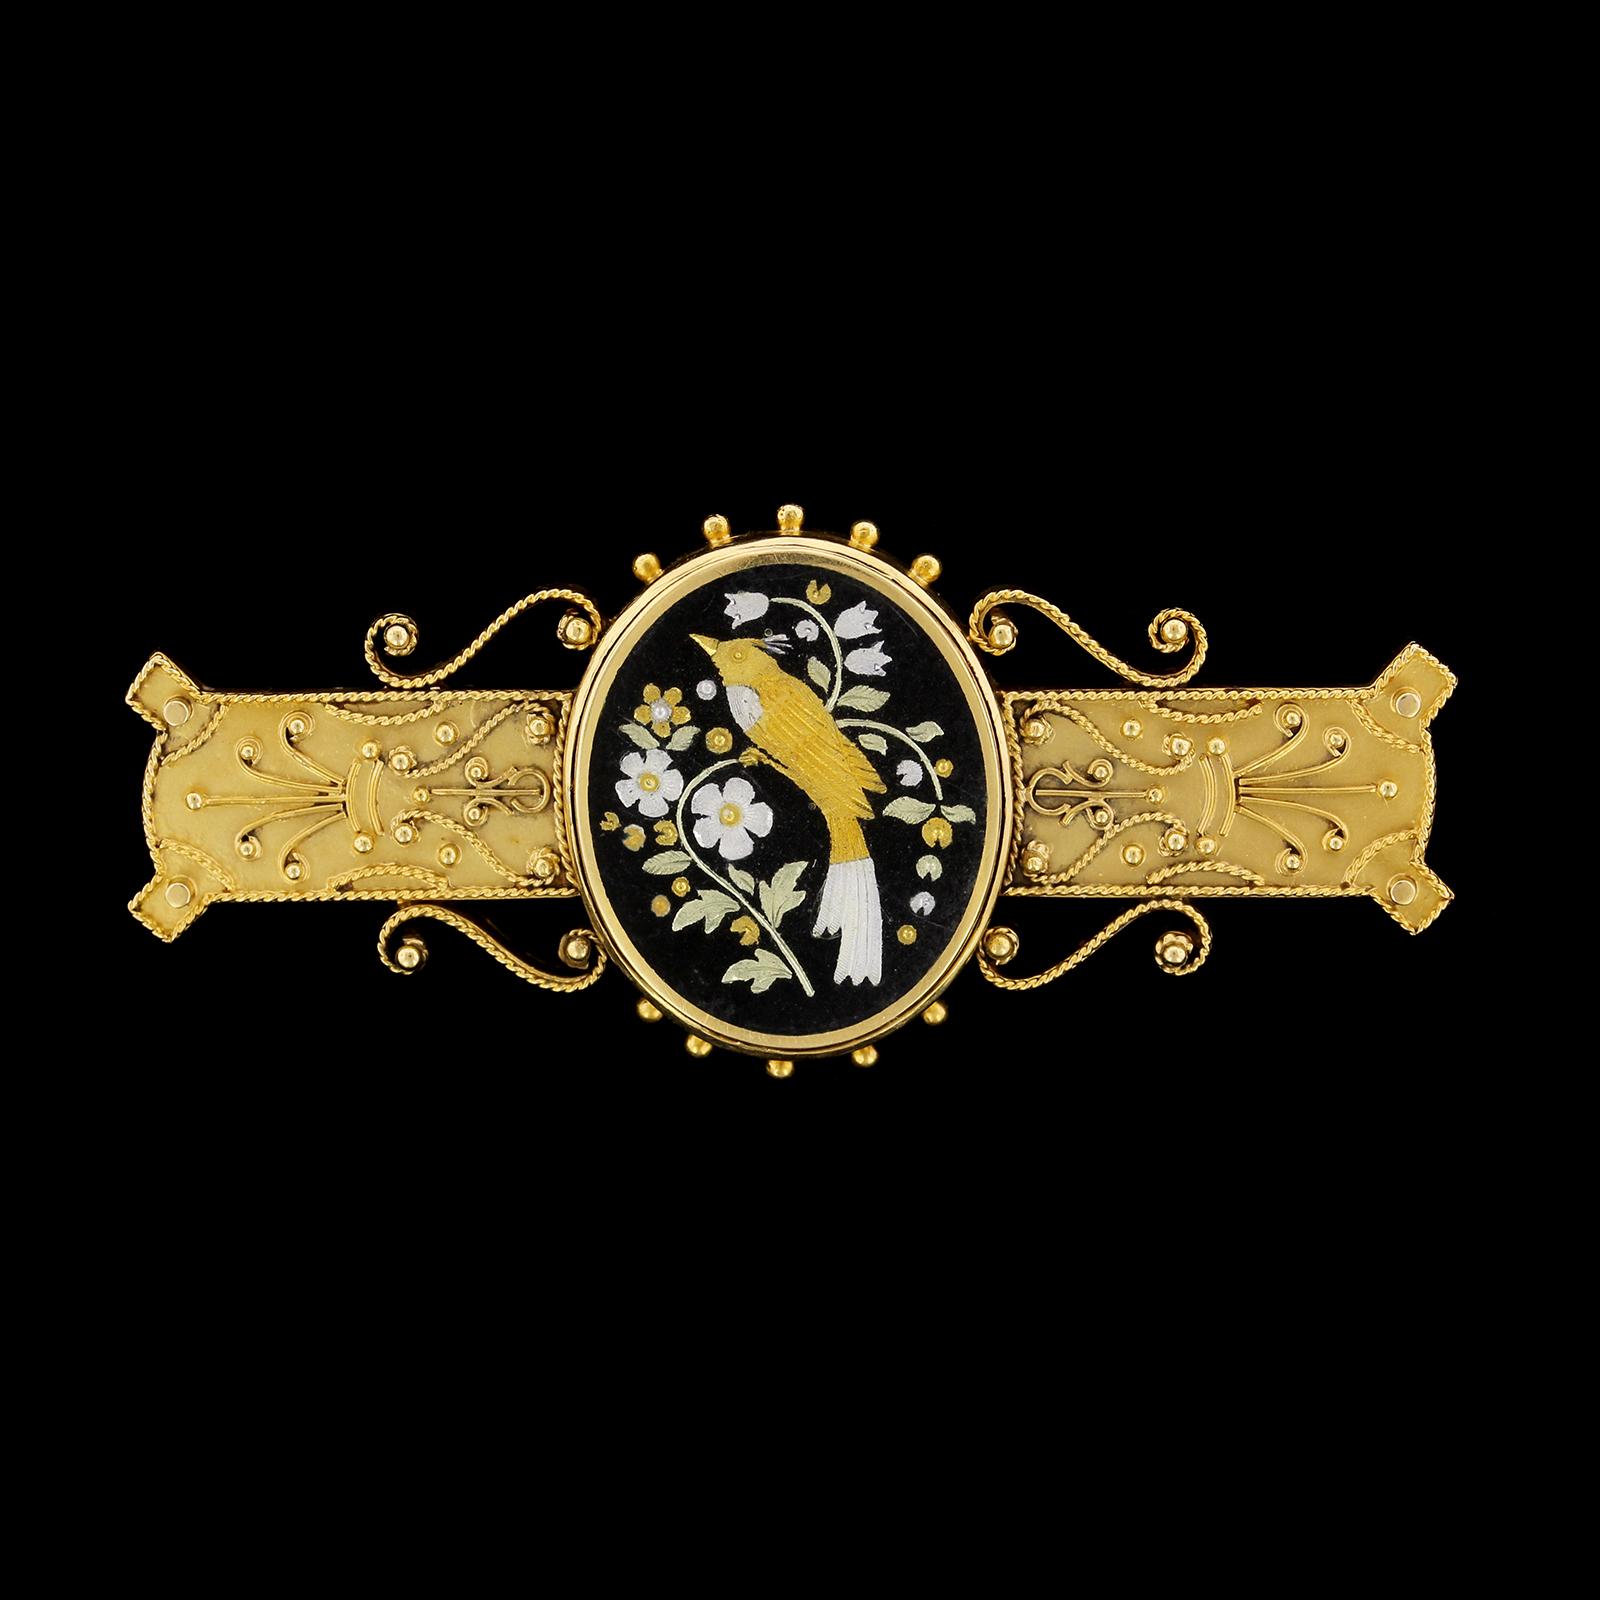 Victorian Etruscan Revival 18K Yellow Gold Damascene Pin. The pin is set with an
Damascene panel depicting a bird amongst flowers with ropetwist and beaded
accents, length 1 3/8